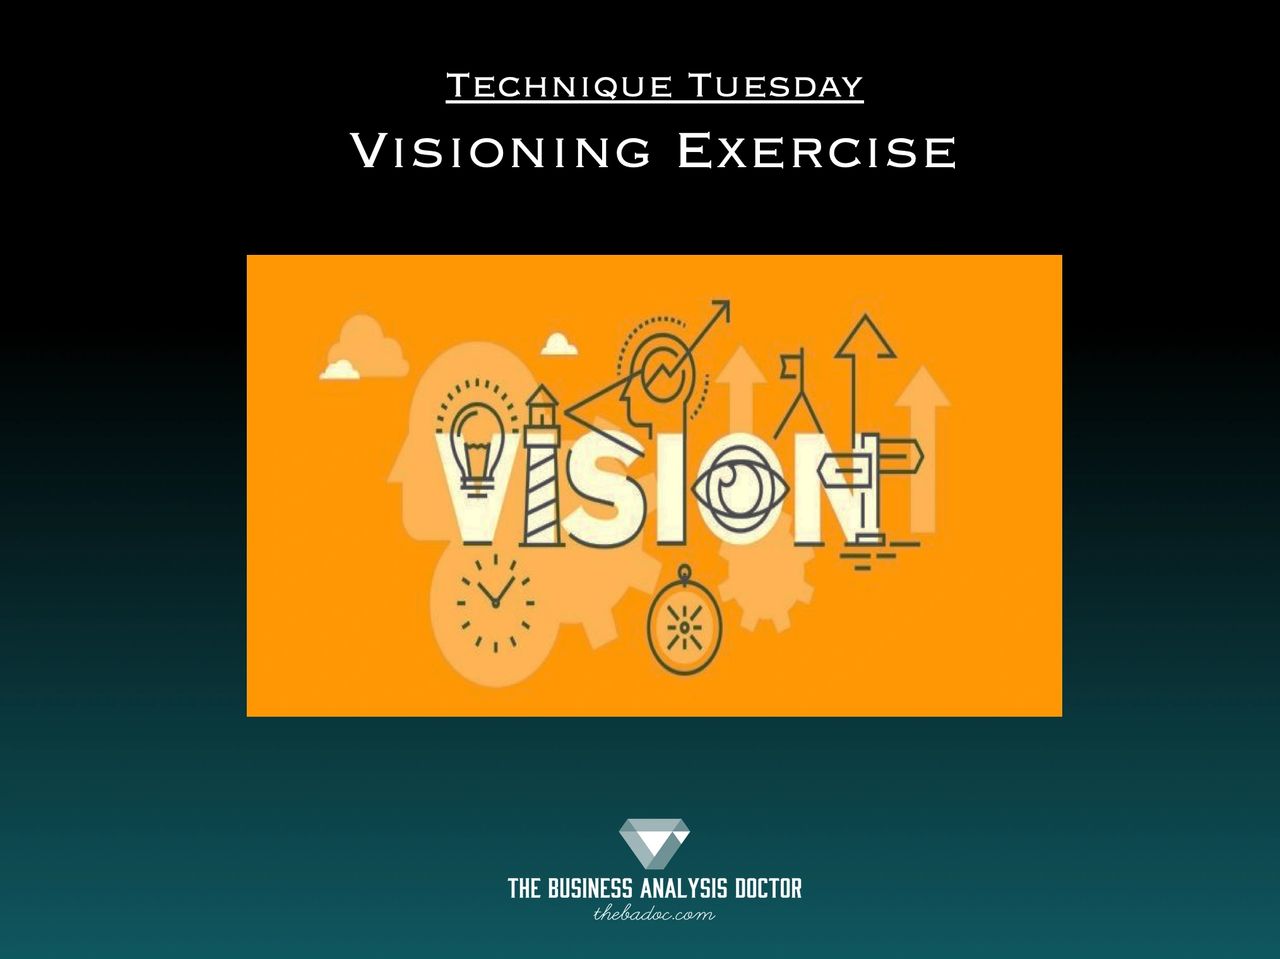 mission and vision statement logo